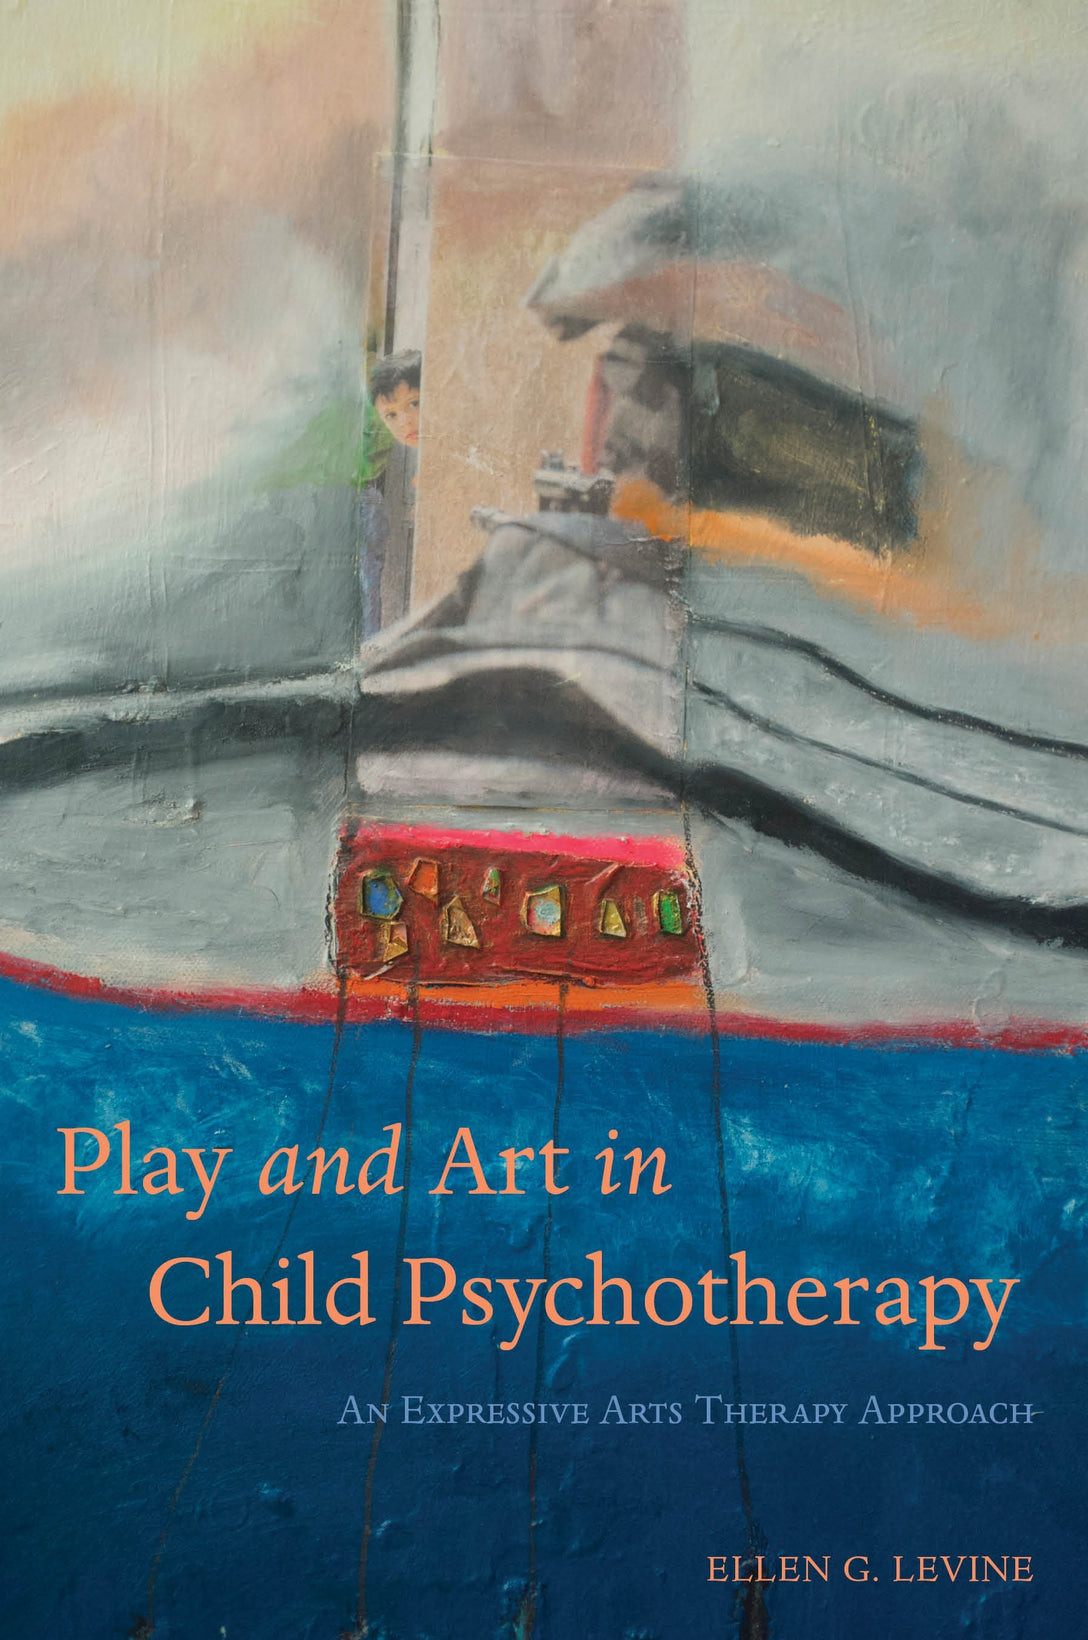 Play and Art in Child Psychotherapy by Ellen G. Levine